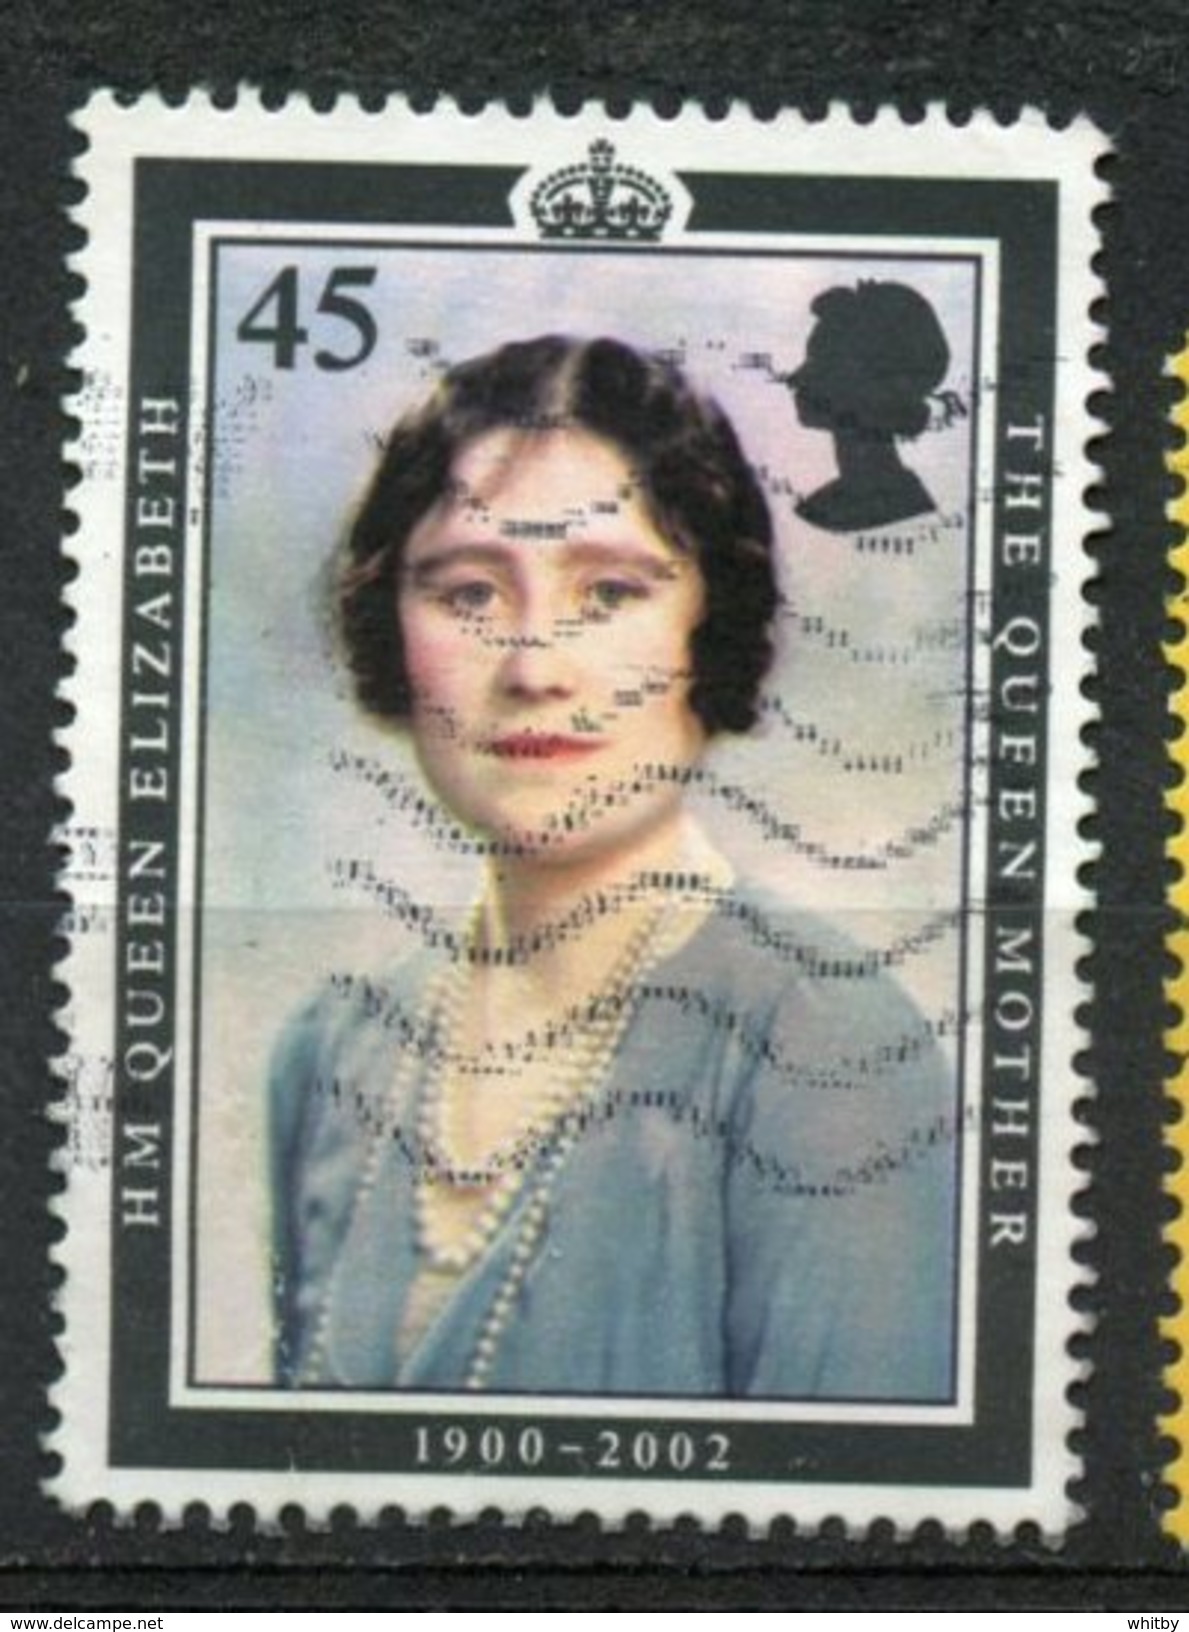 Great Britain 2002 45p Queen Mother Issue #2046 - Used Stamps